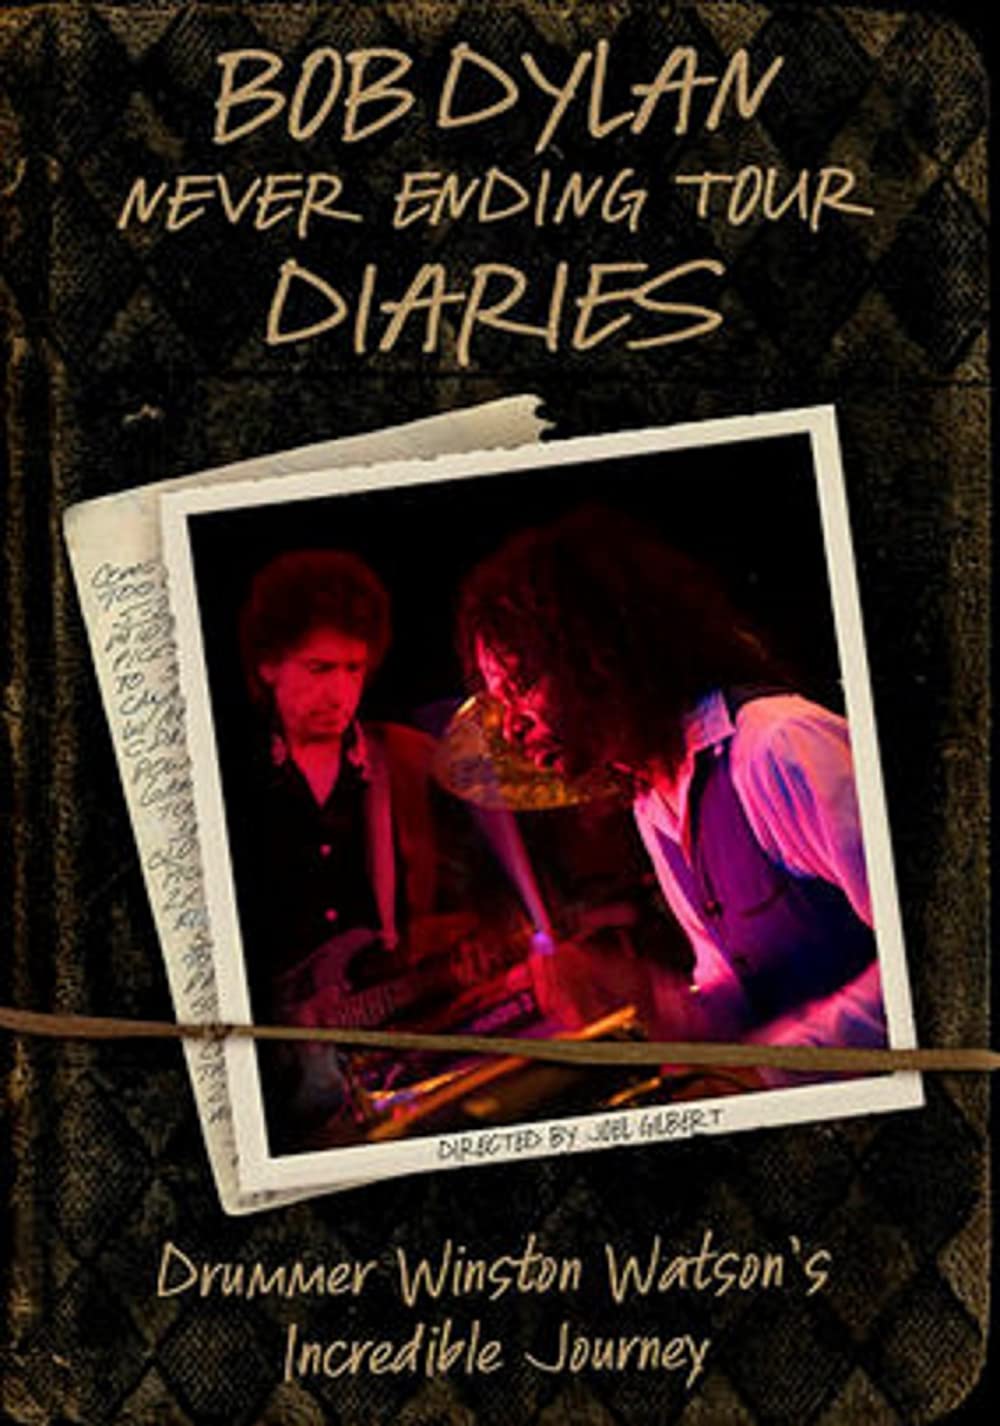 Download Bob Dylan Never Ending Tour Diaries: Drummer Winston Watson's Incredible Journey Movie | Bob Dylan Never Ending Tour Diaries: Drummer Winston Watson's Incredible Journey Online